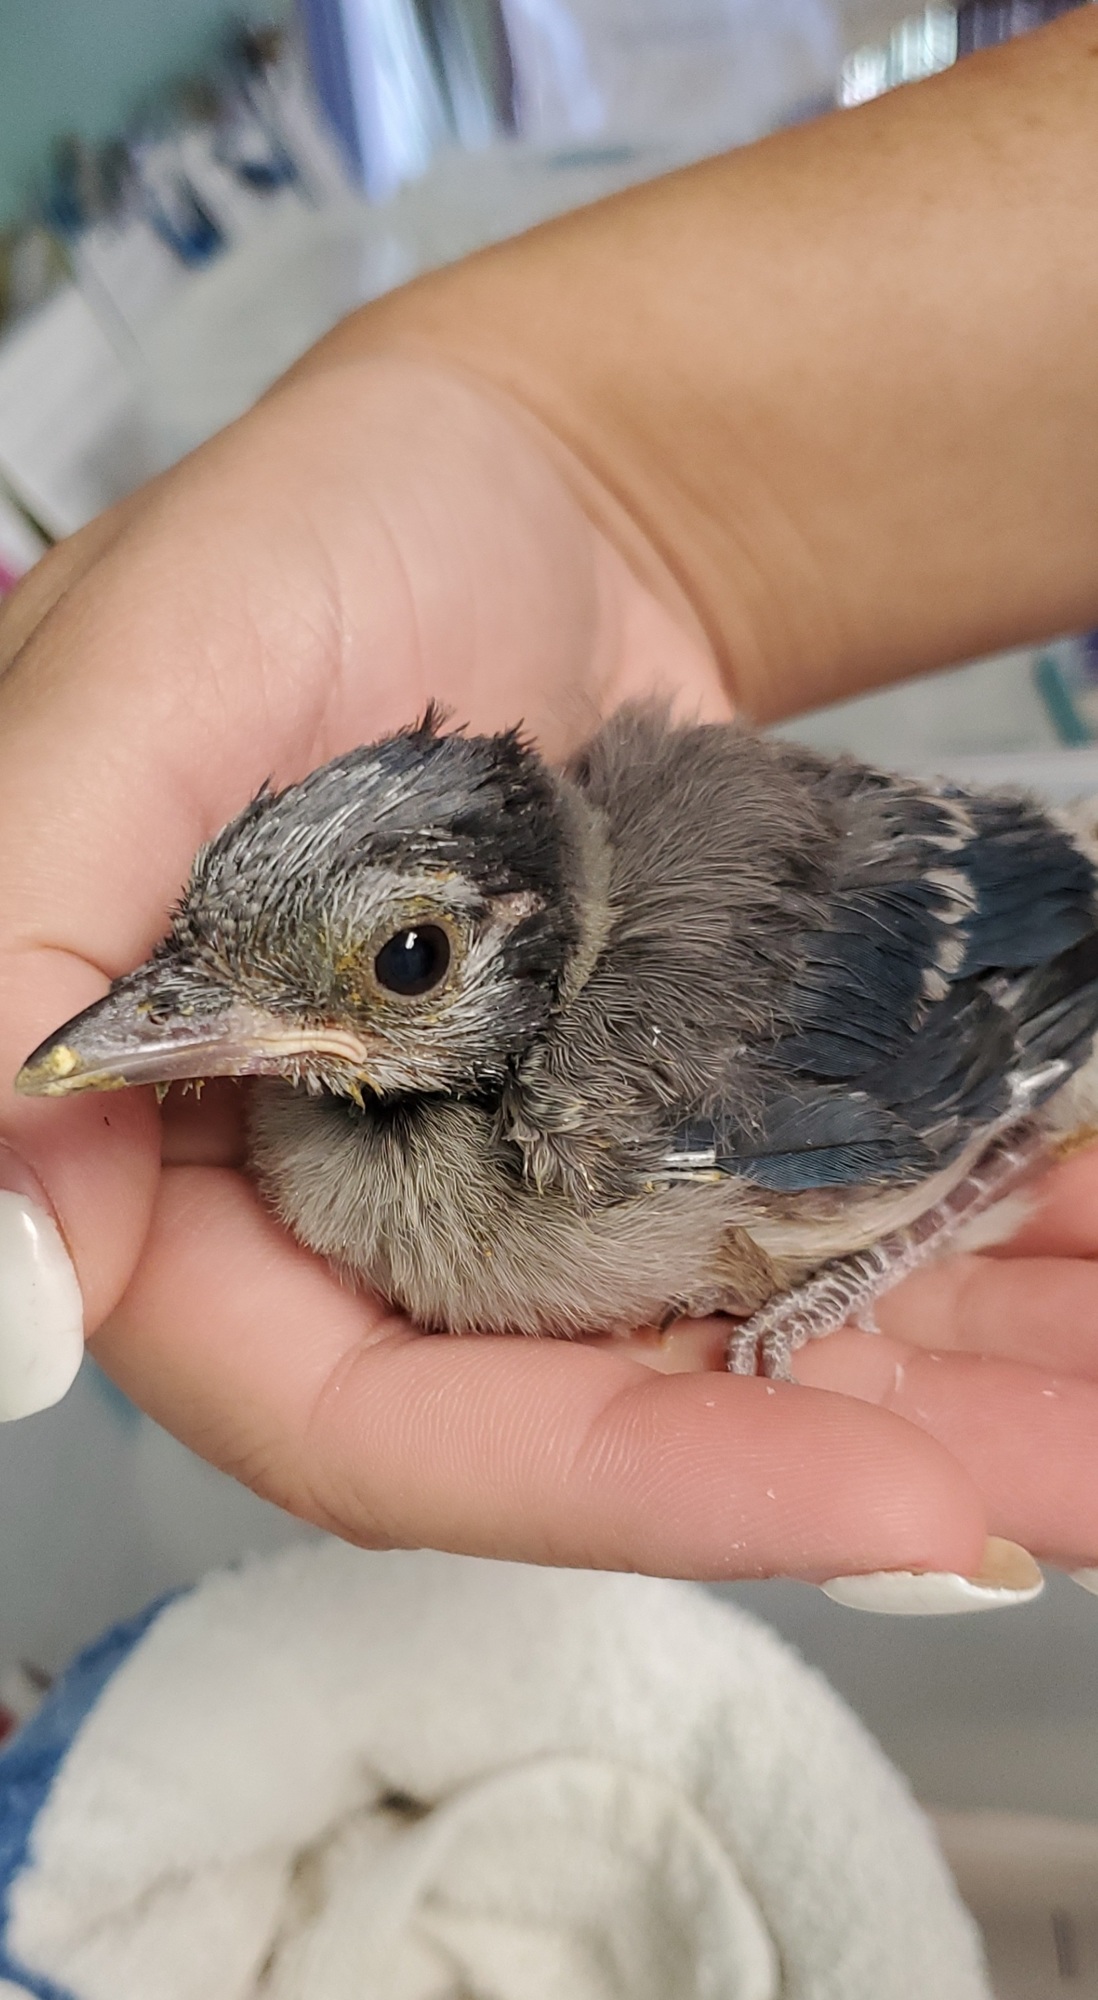 Save Our Seabirds Operations Manager Jocelyn Shearer said this baby blue jay, rescued by Greenbrook's Lisa Laufenberg on May 28, could be ready to be released in the wild sometime in July. (Courtesy of Save Our Seabirds)